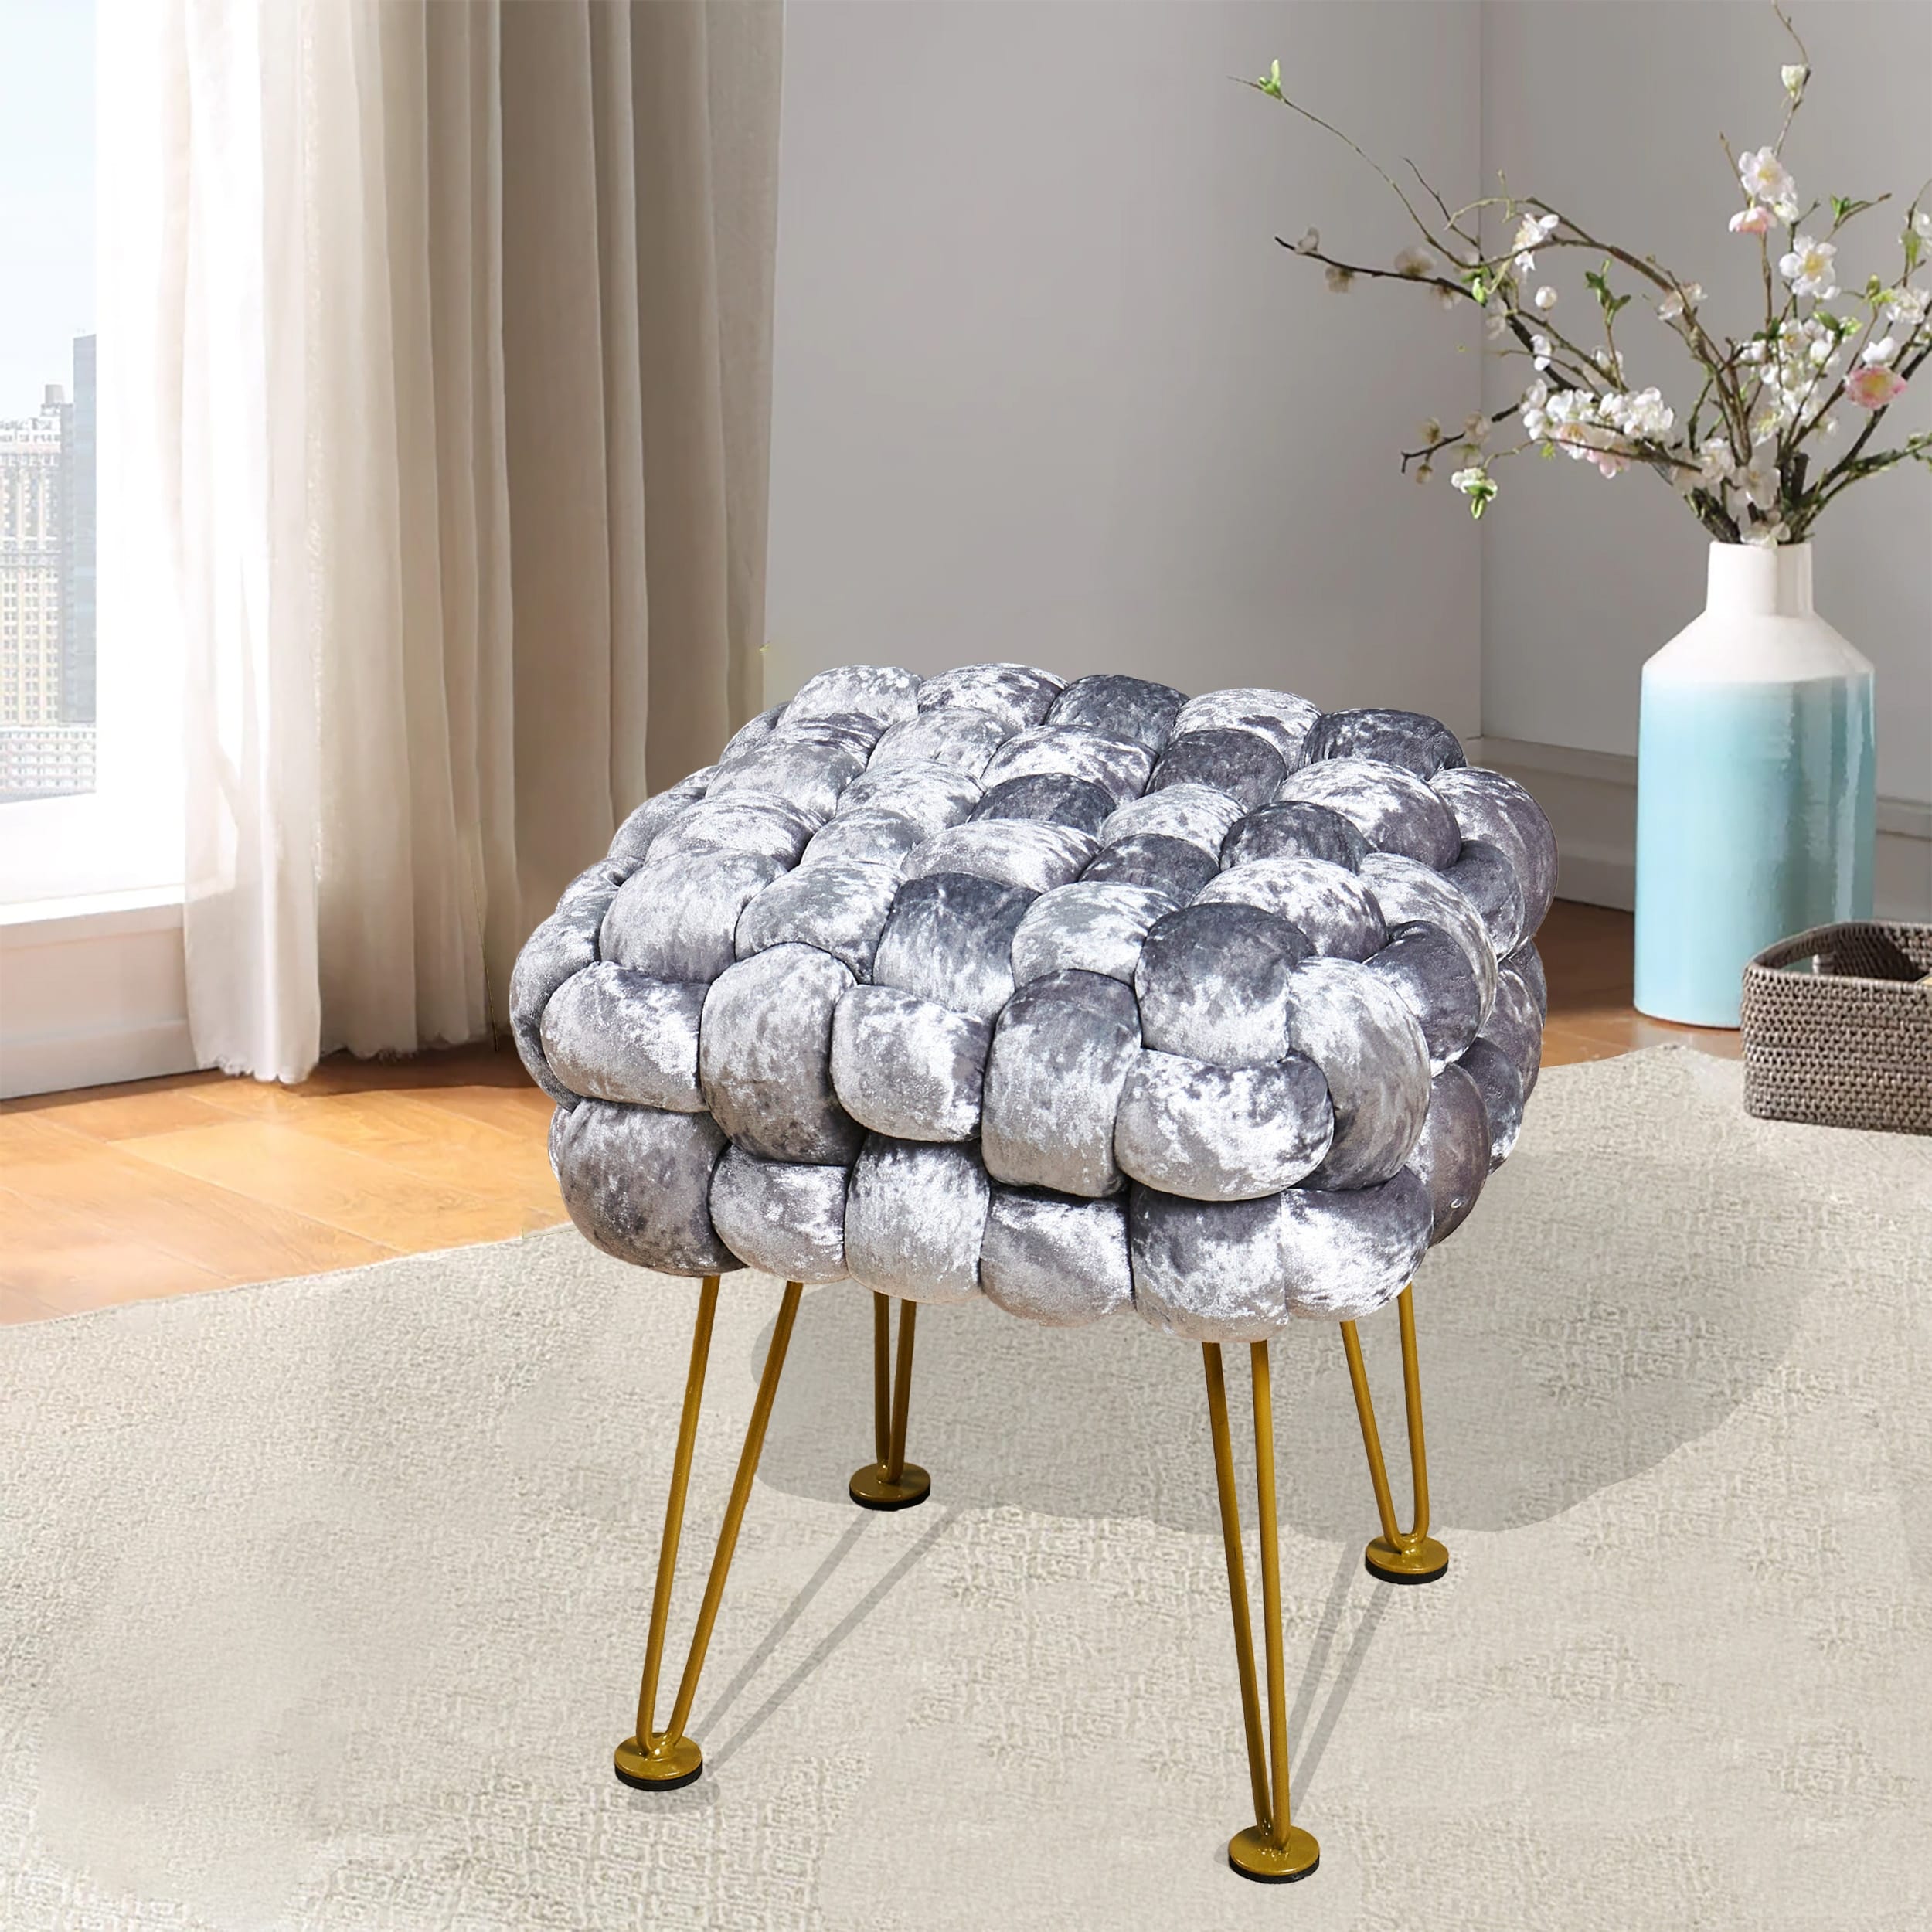 https://ak1.ostkcdn.com/images/products/is/images/direct/14e8ca8cff7f3e3772ff5d545ce5676c7d3897b9/Home-Soft-Things-Crushed-Velvet-Pouf-Stool-Ottoman.jpg